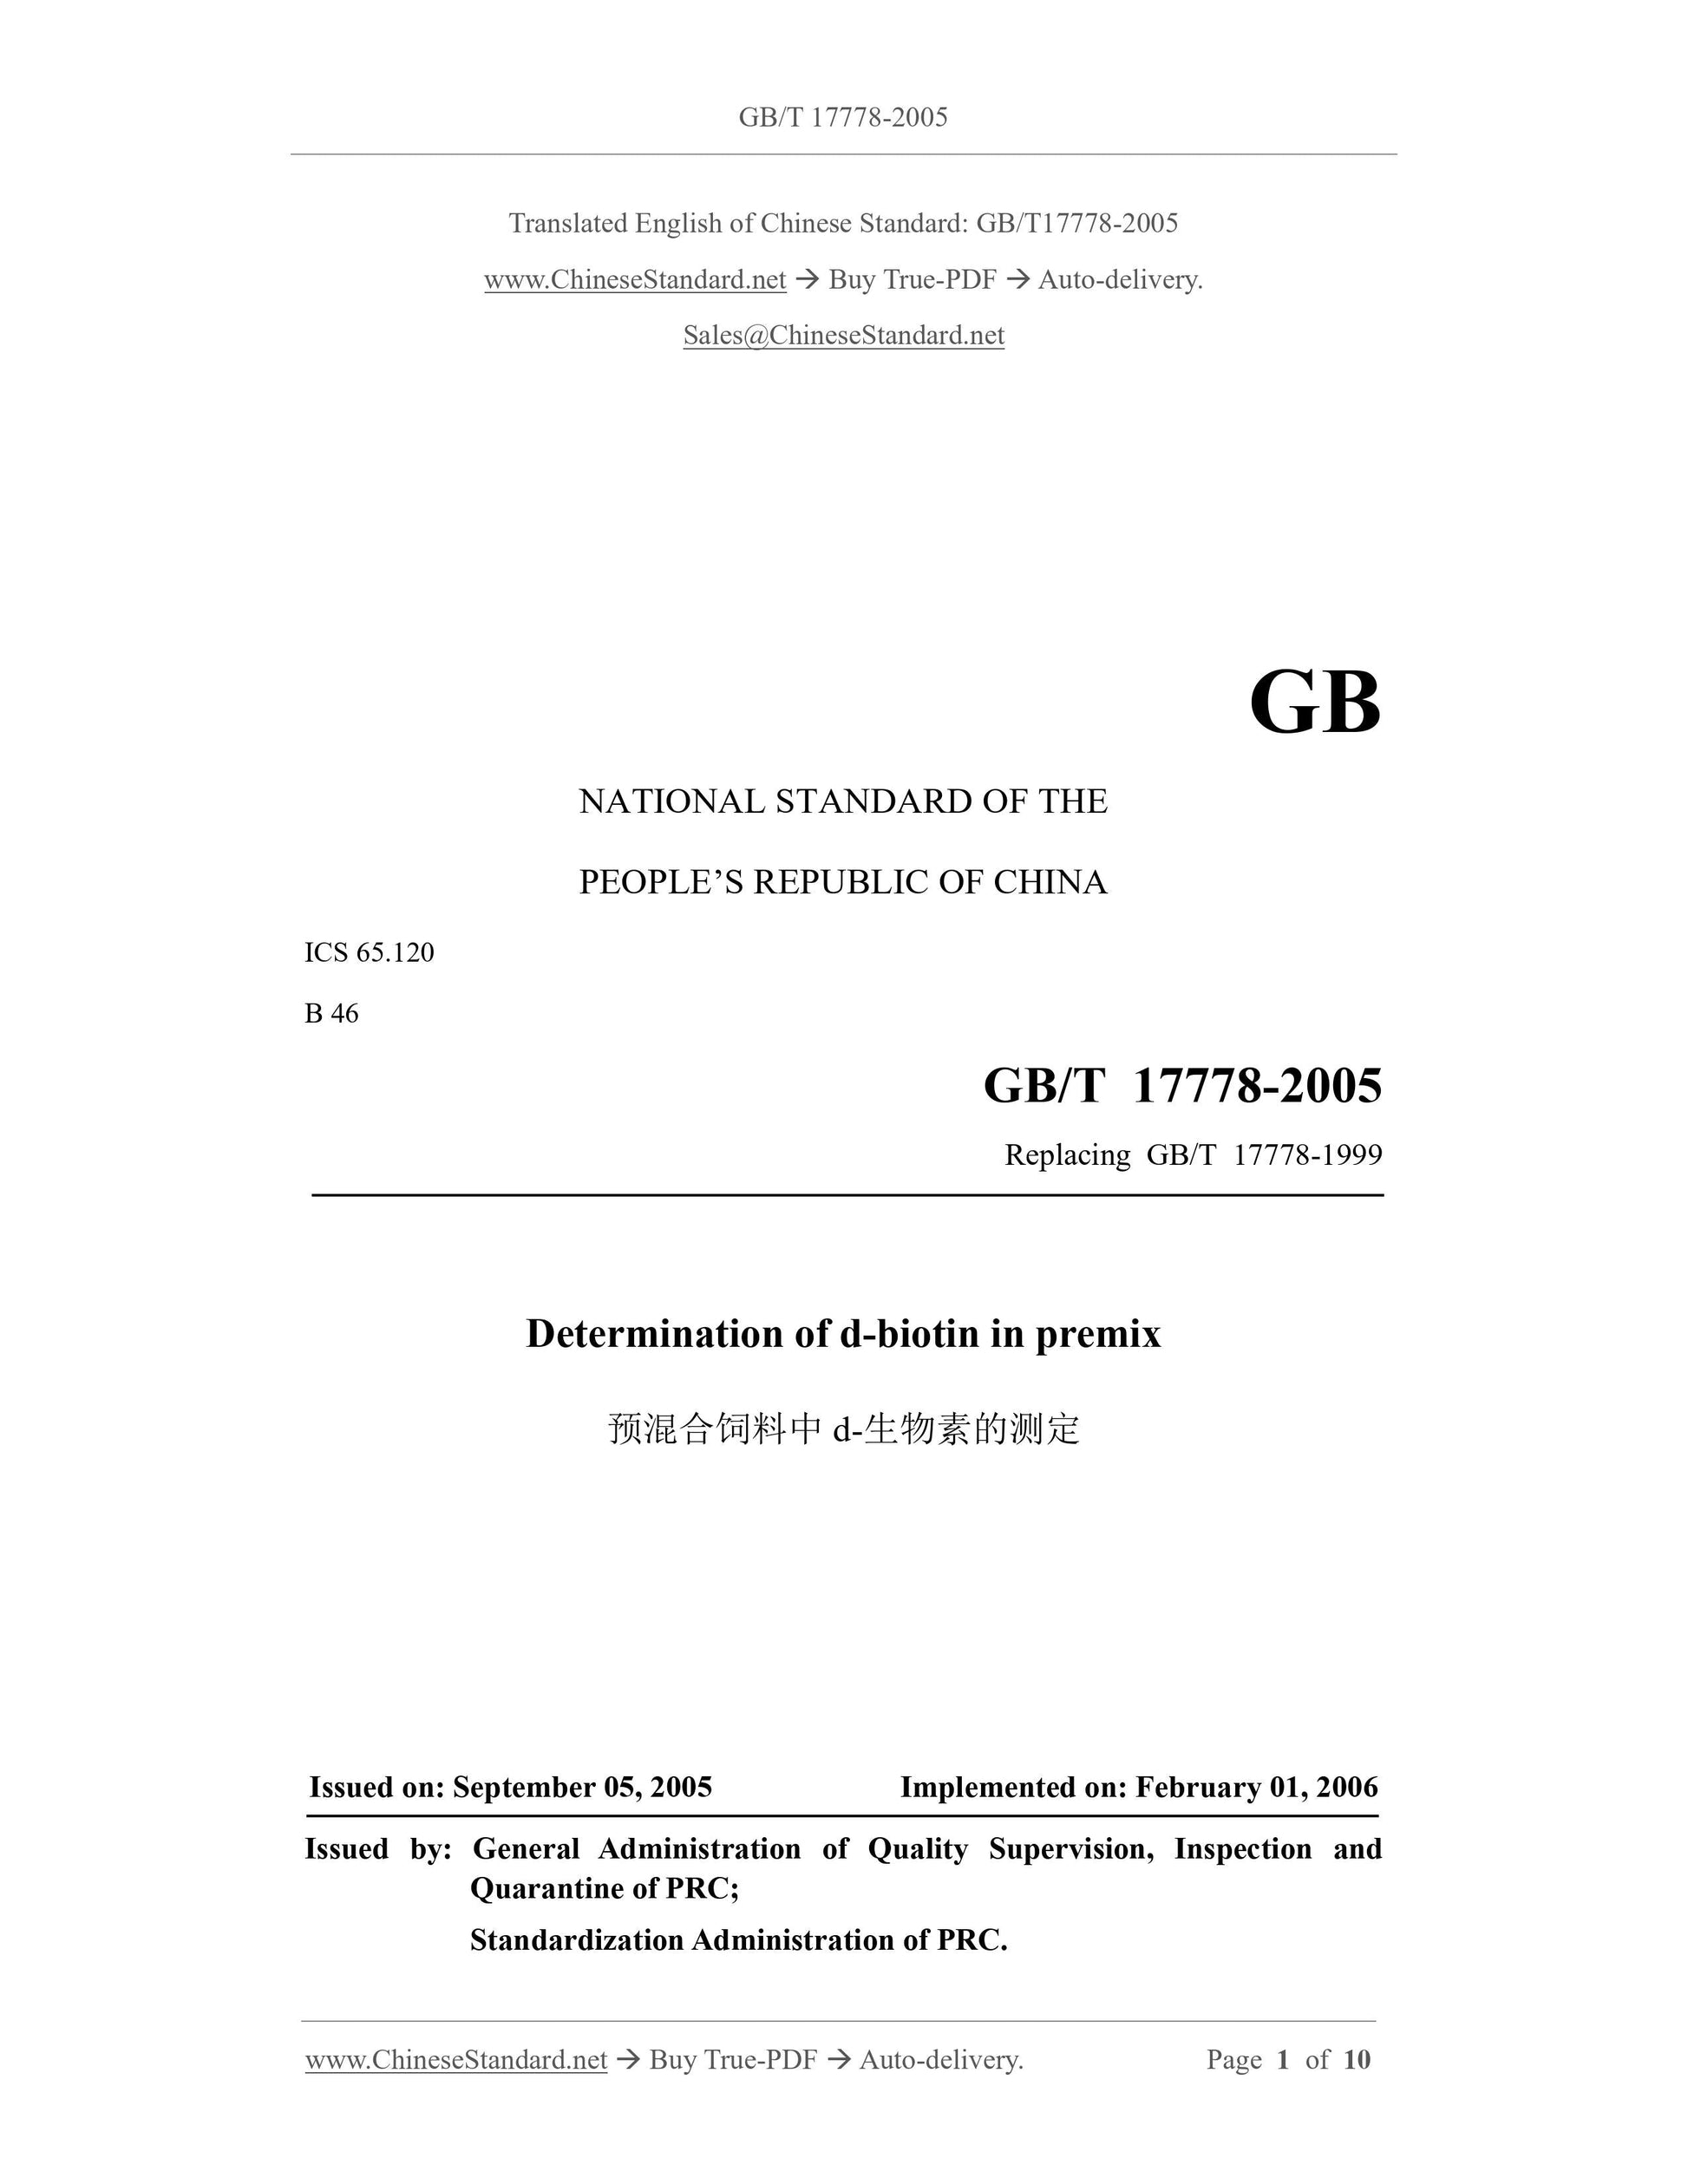 GB/T 17778-2005 Page 1